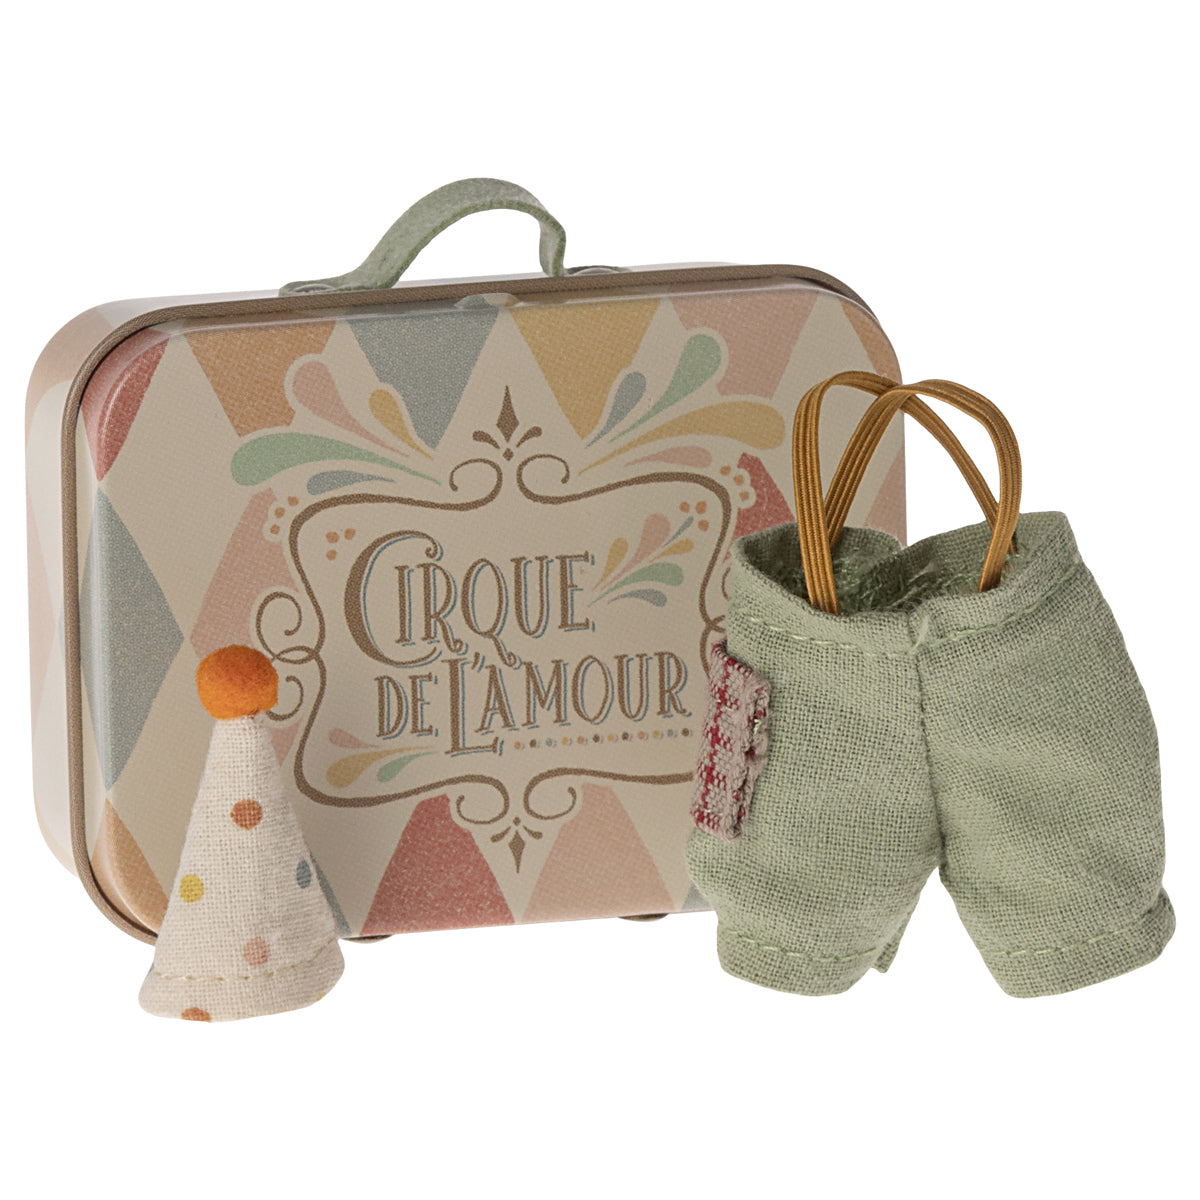 Maileg, Clown Clothes in Suitcase, Little Brother Mouse 17-4103-00